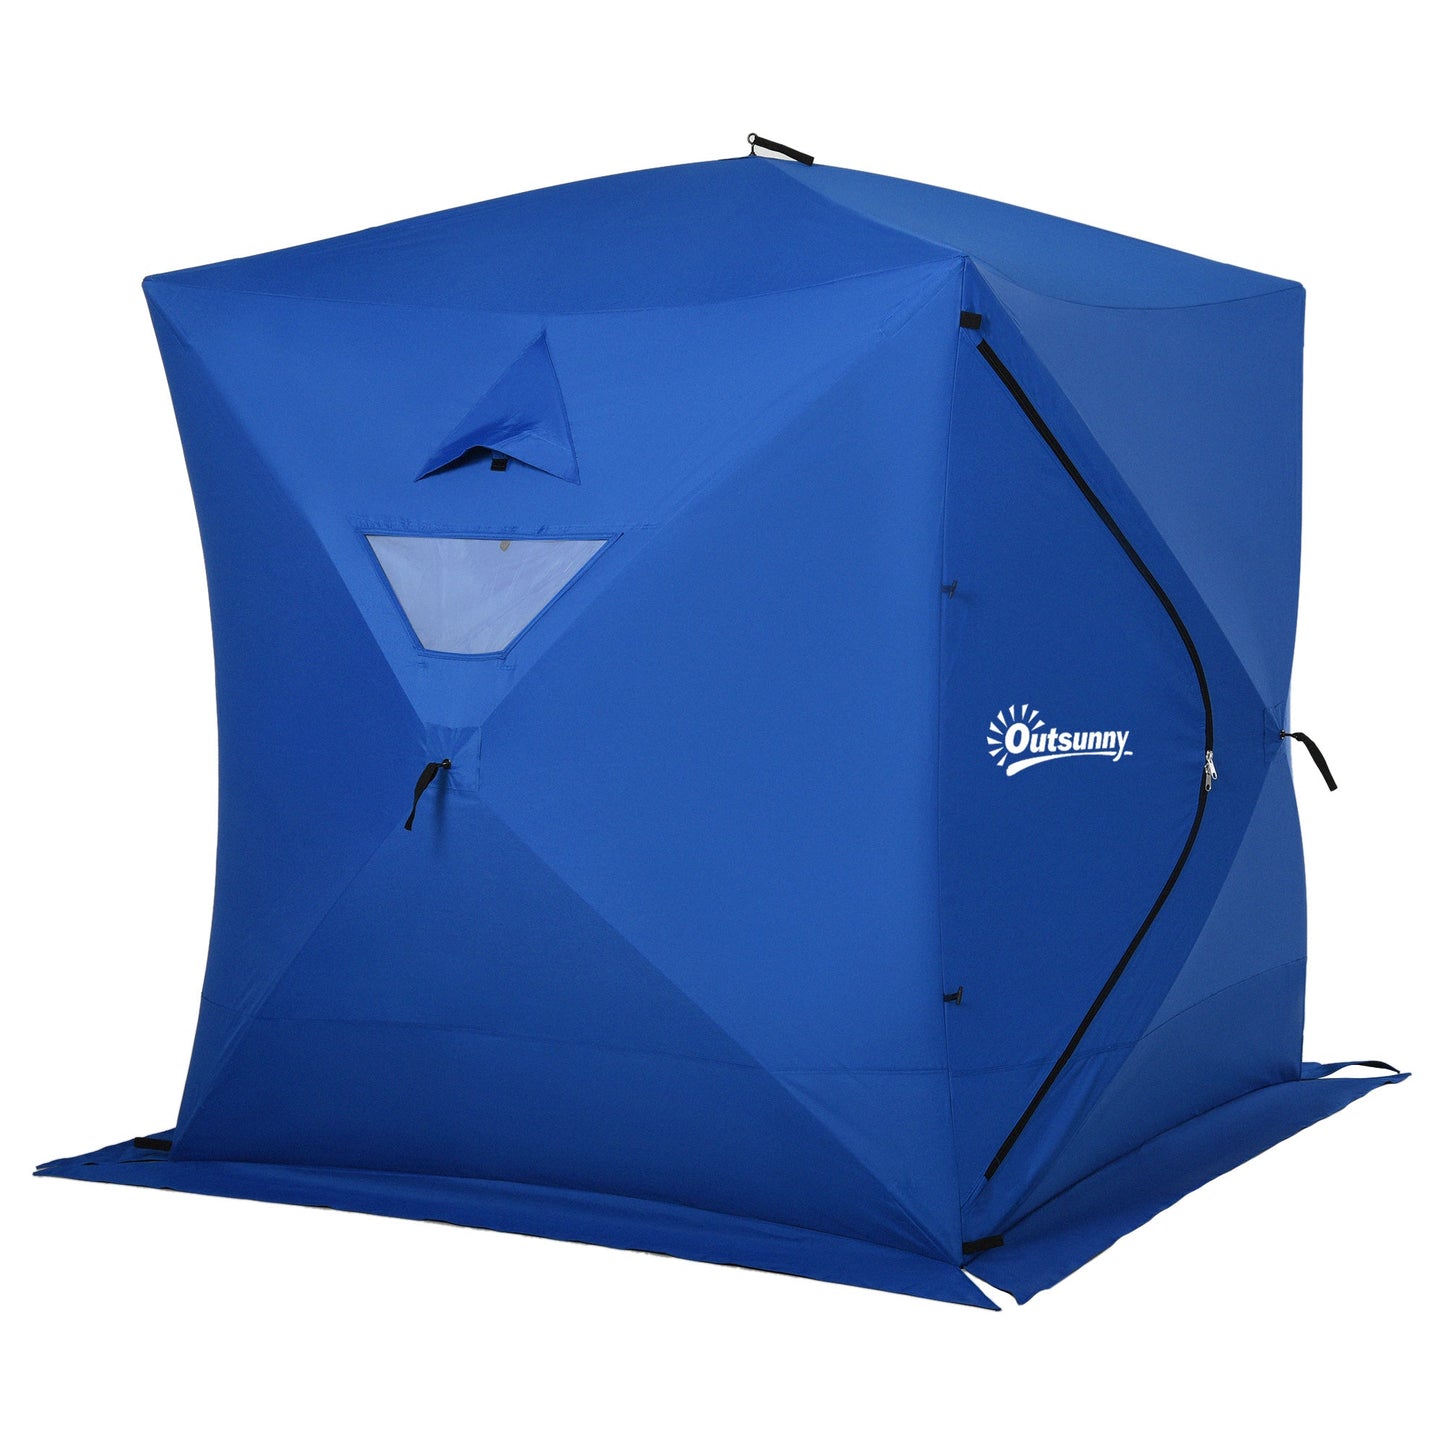 Outdoor and Garden-4 Person Ice Fishing Tent, Waterproof Oxford Fabric Portable Pop-up Ice Tent with 2 Doors for Outdoor Fishing, Blue - Outdoor Style Company